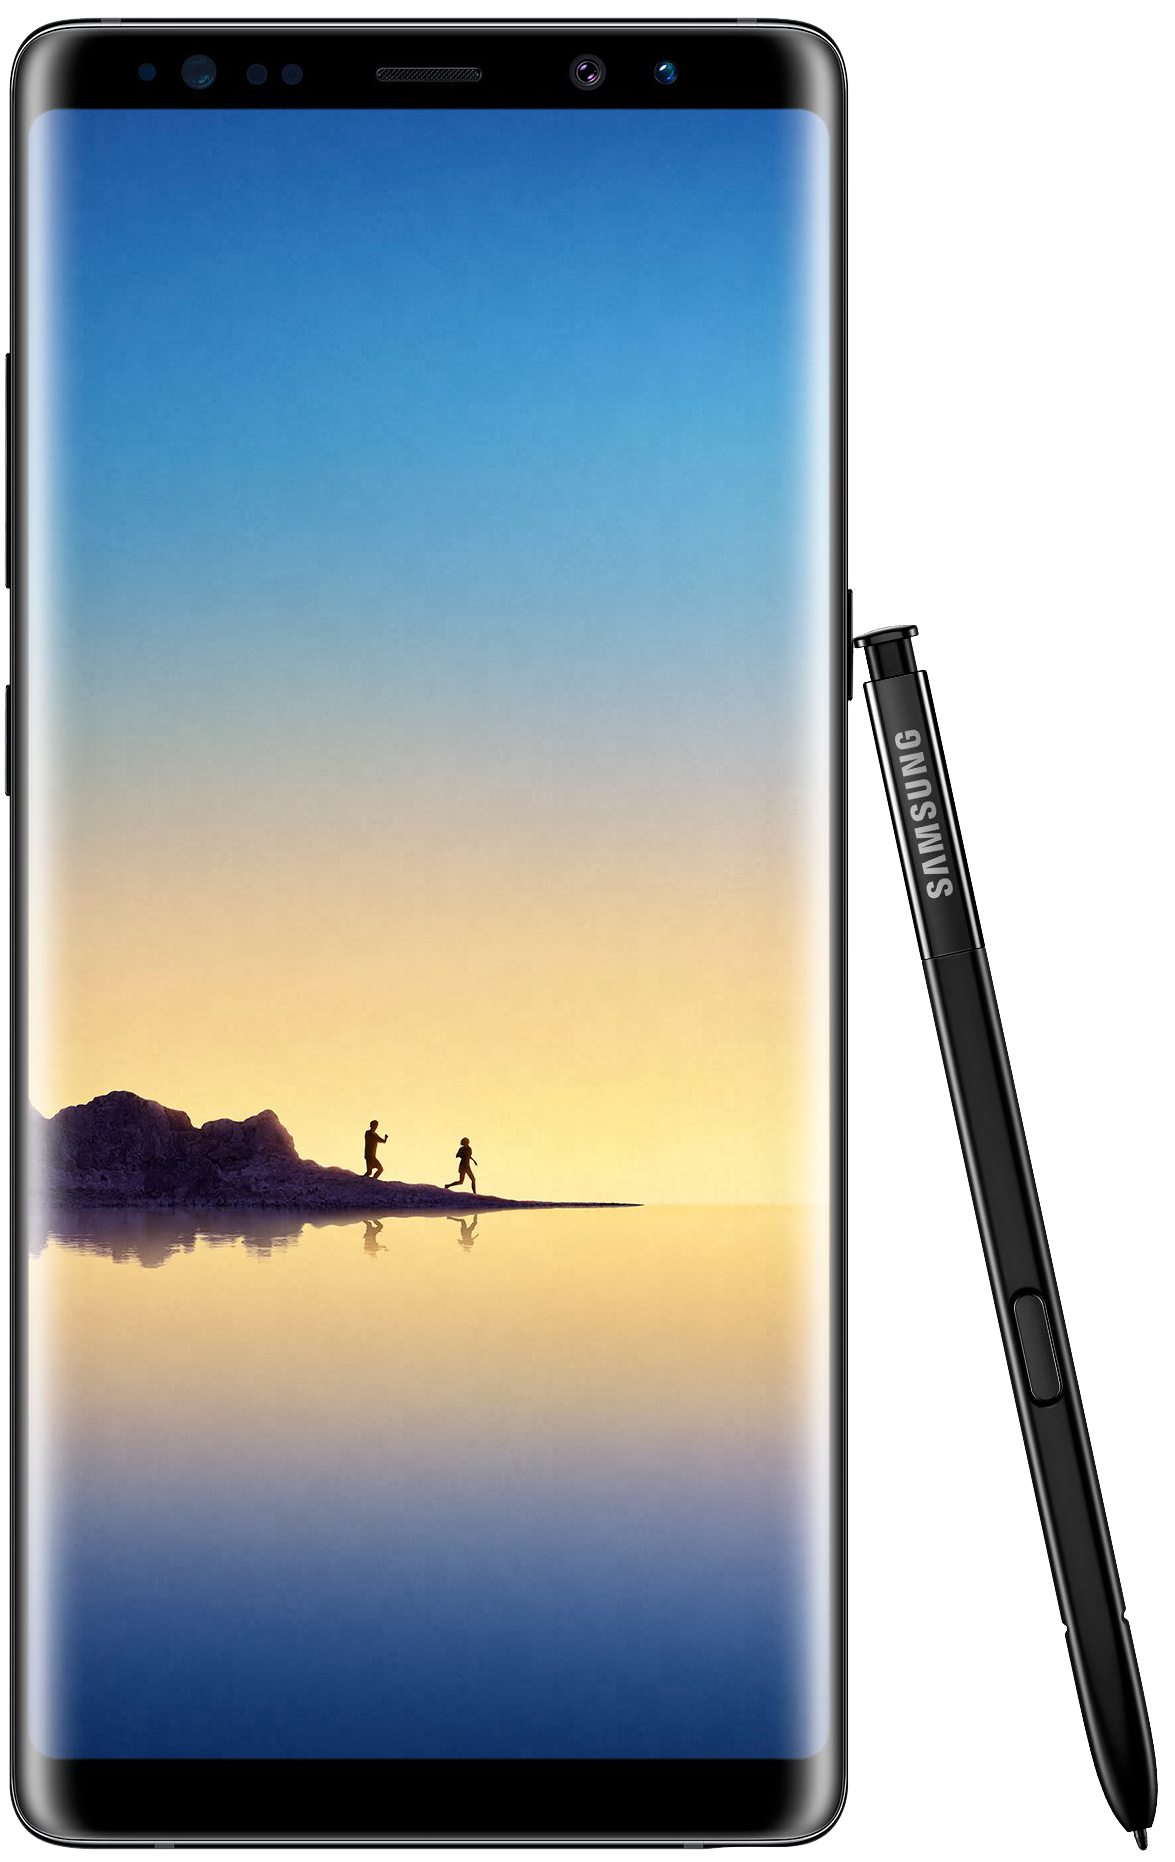 Image of Samsung Galaxy Note9